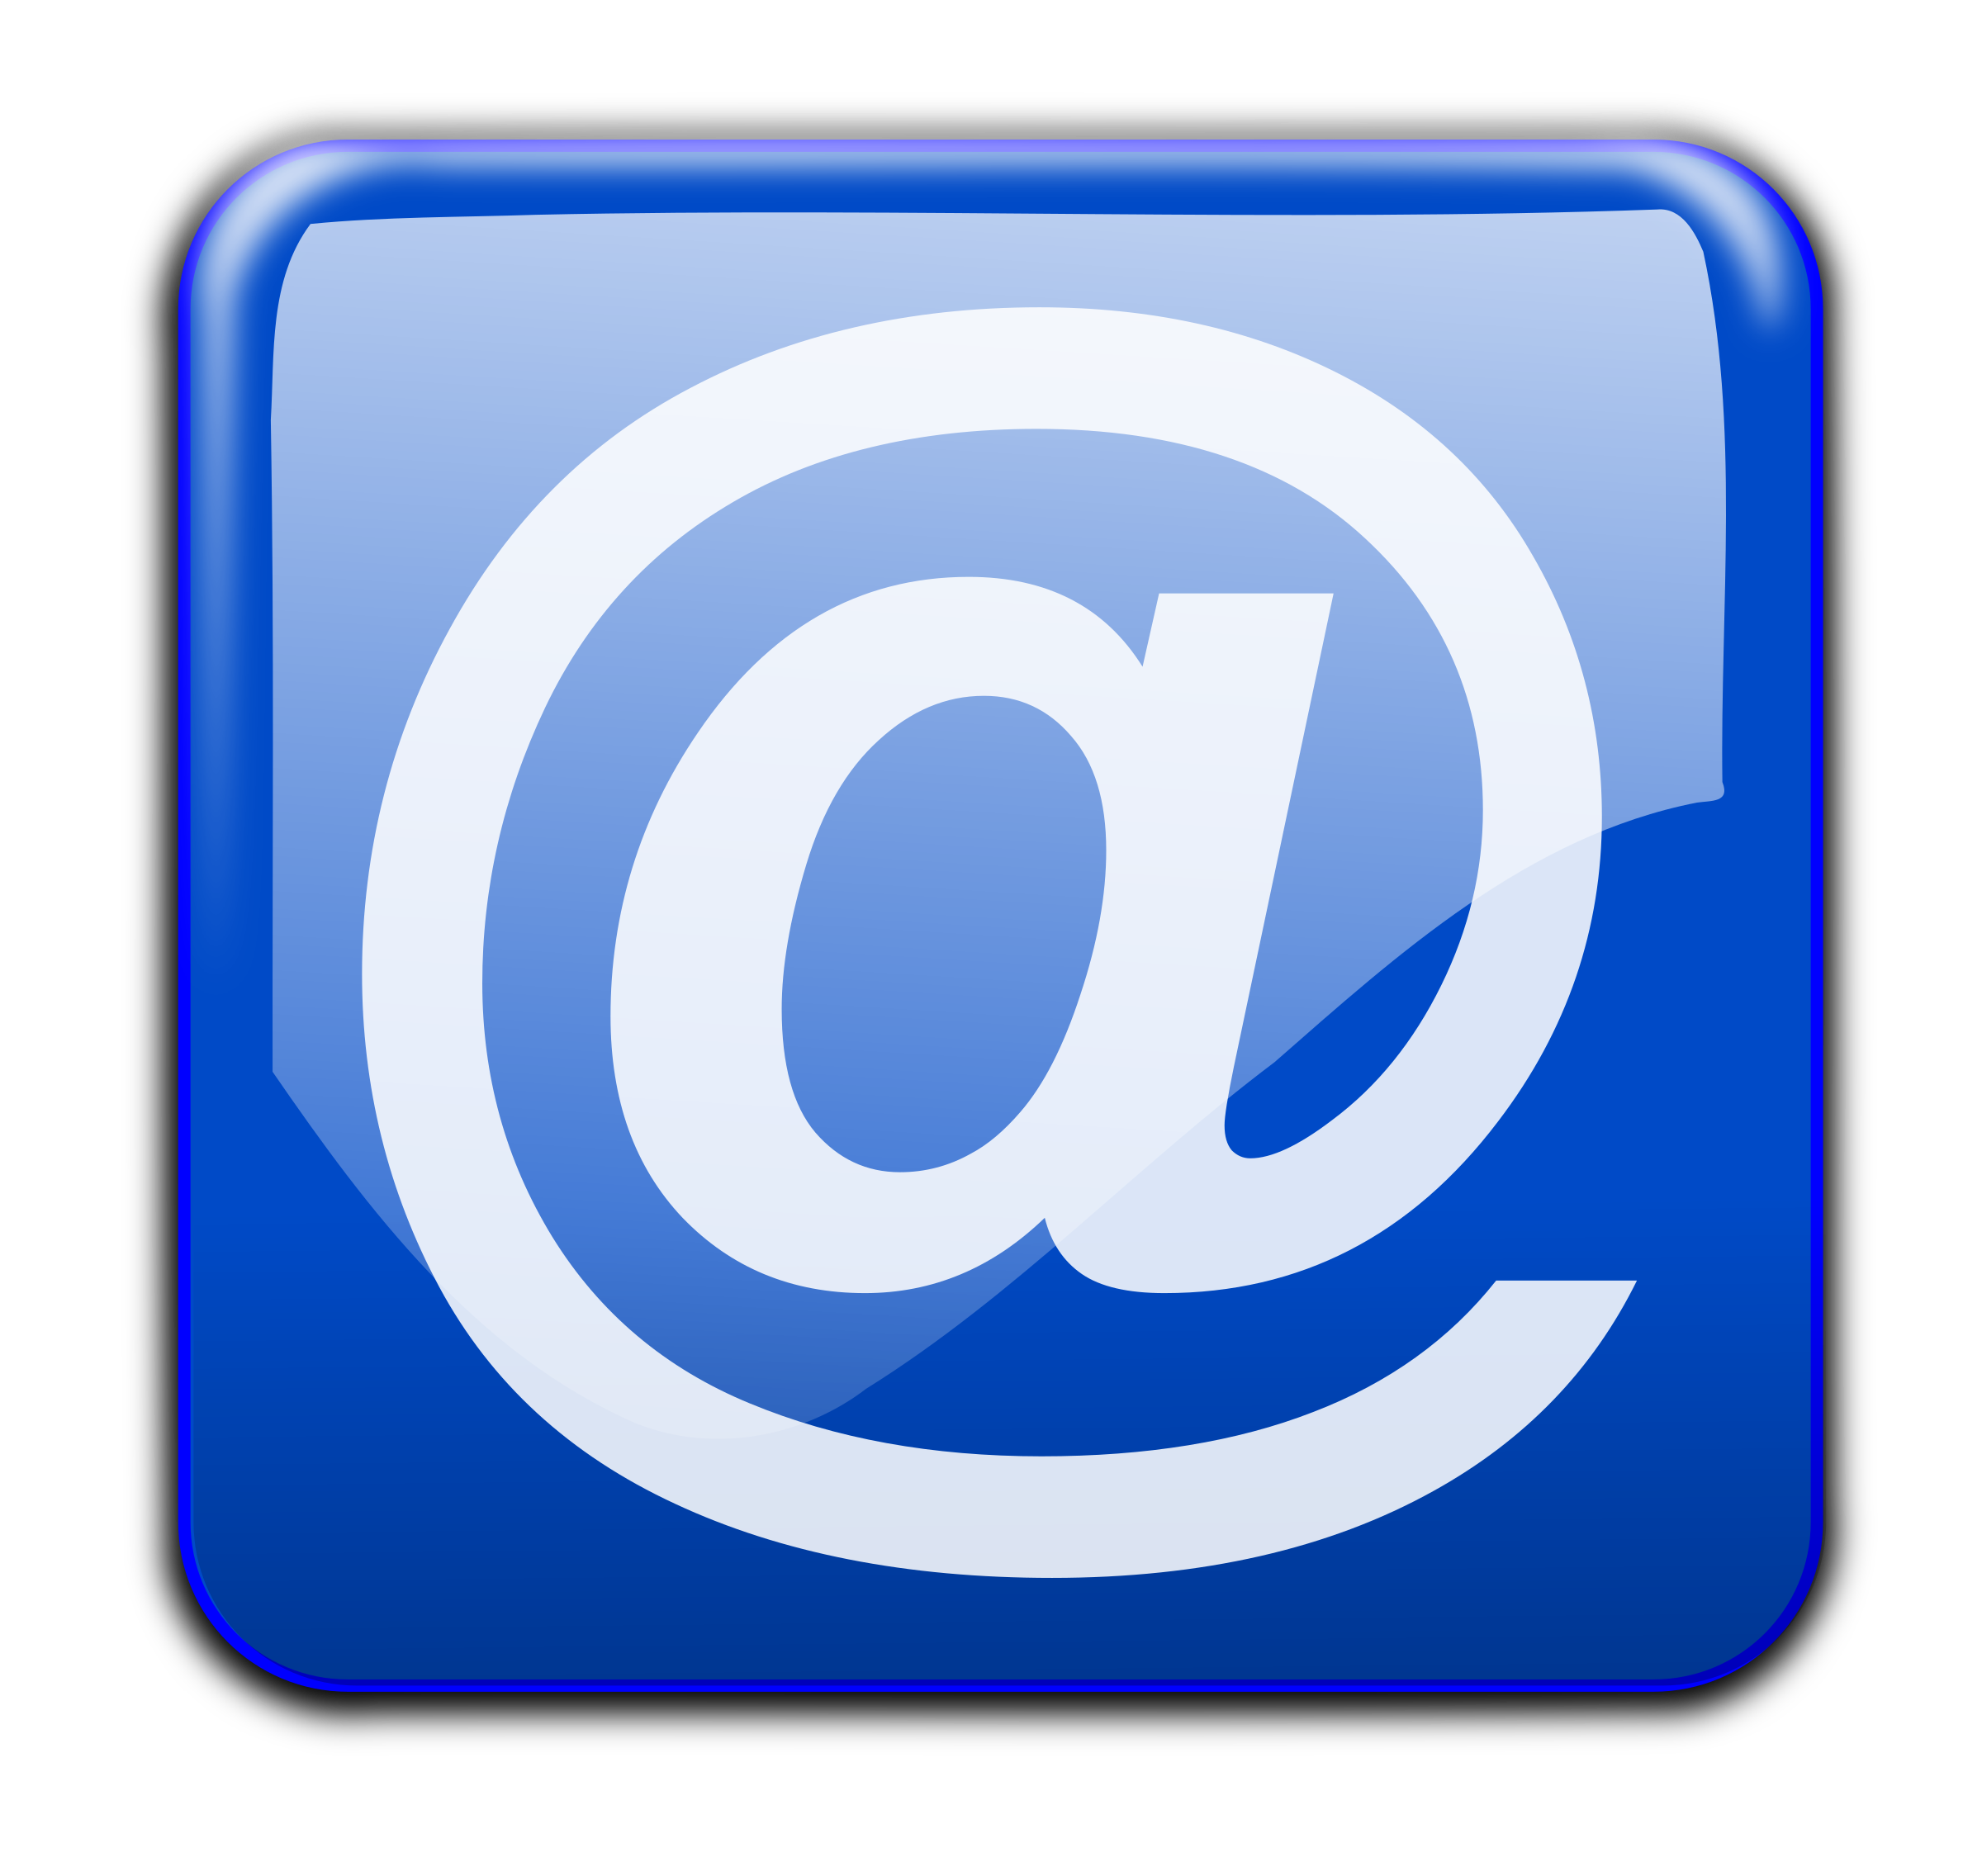 email logo clipart - photo #43